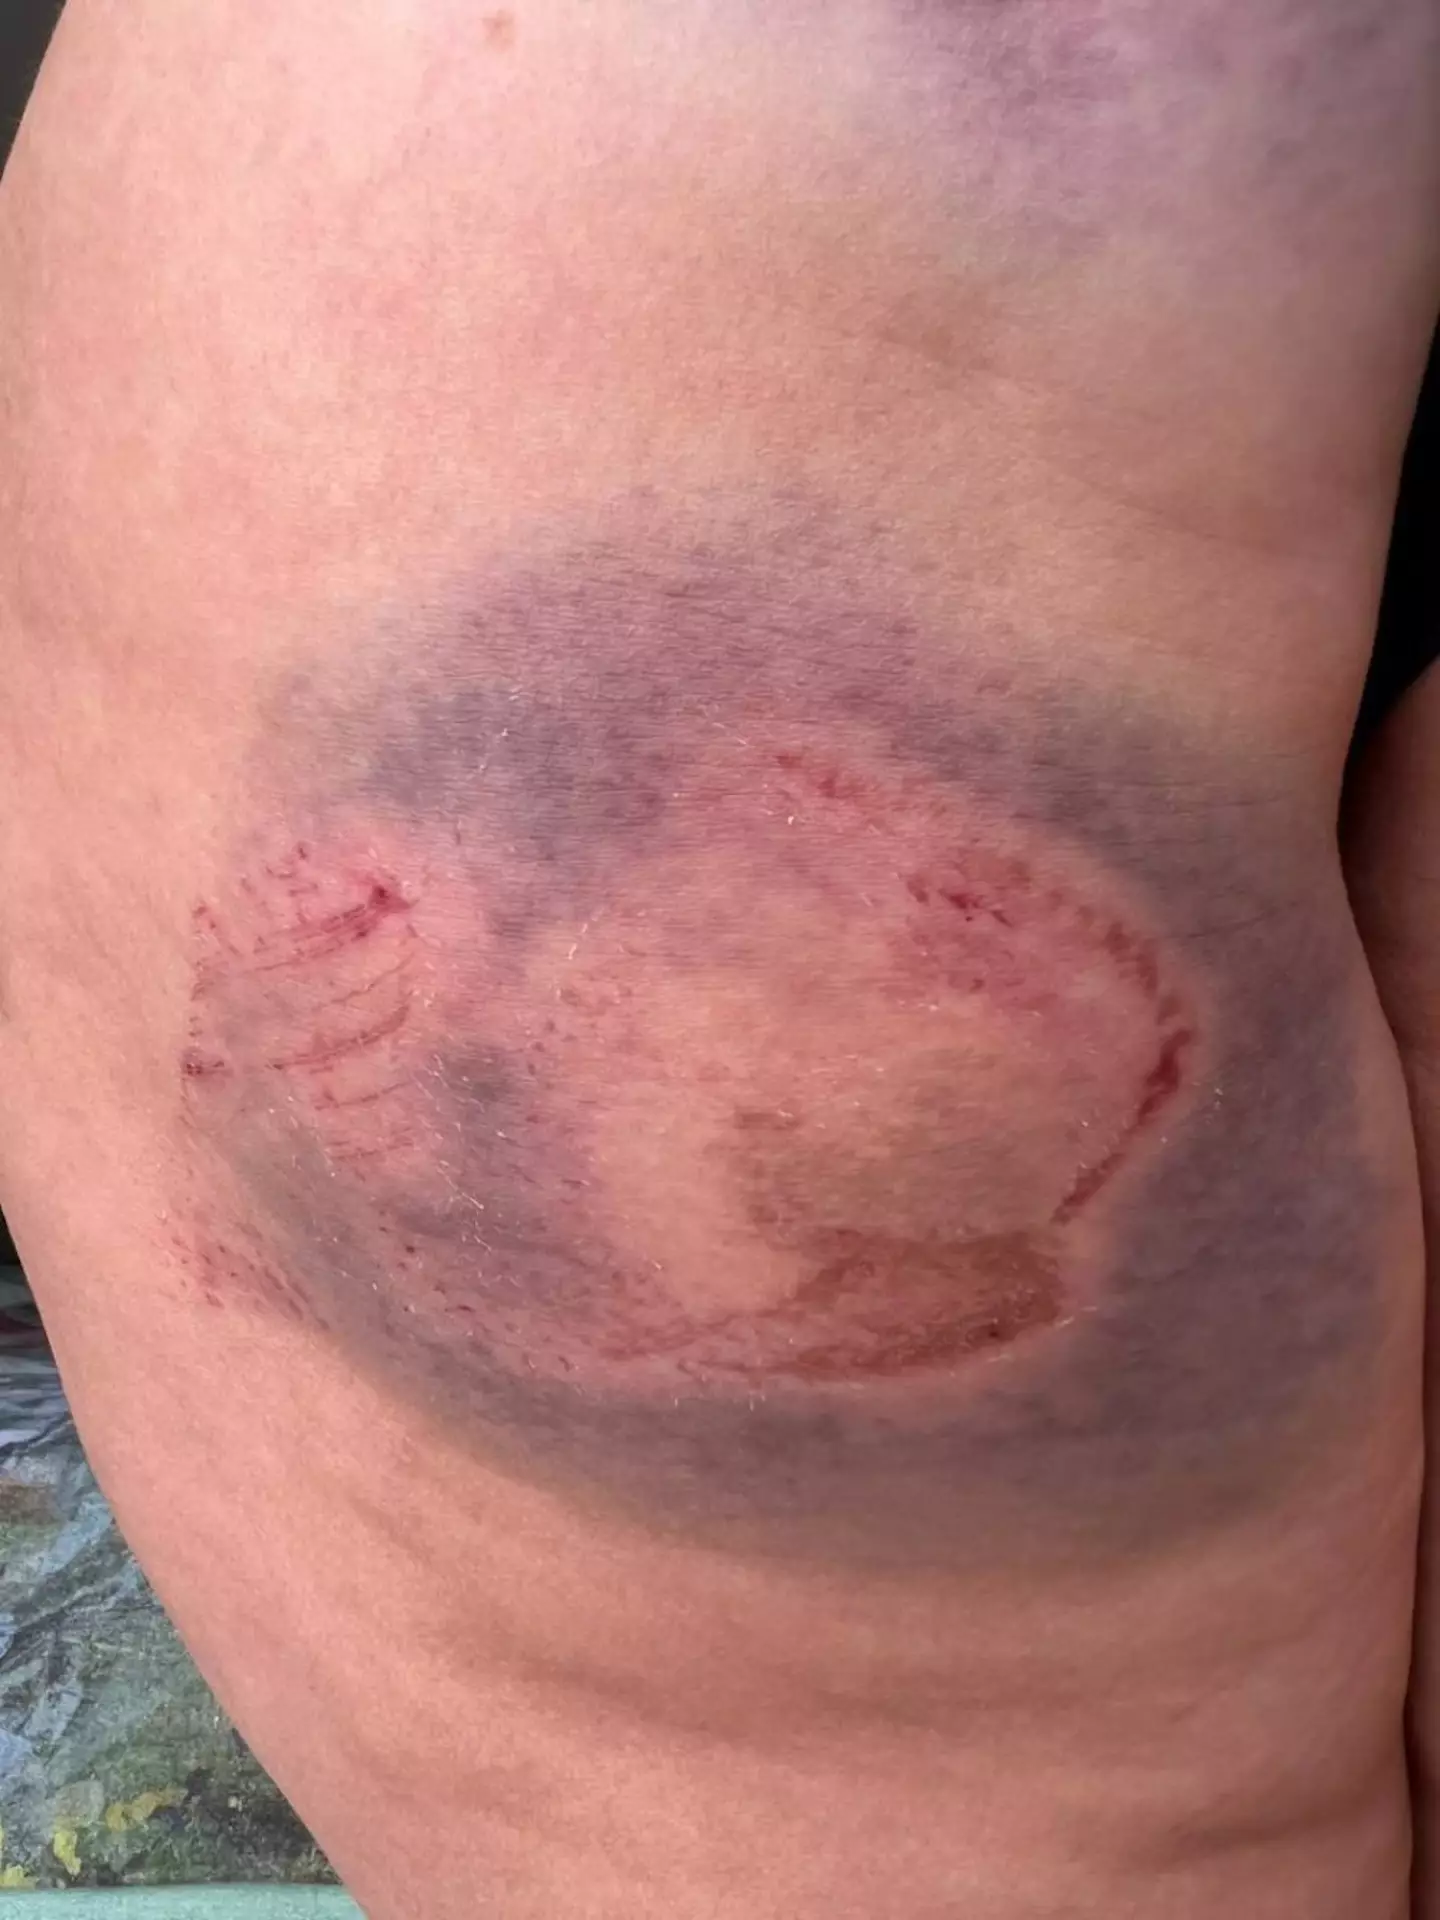 The attack left the tourist with significant bruises.